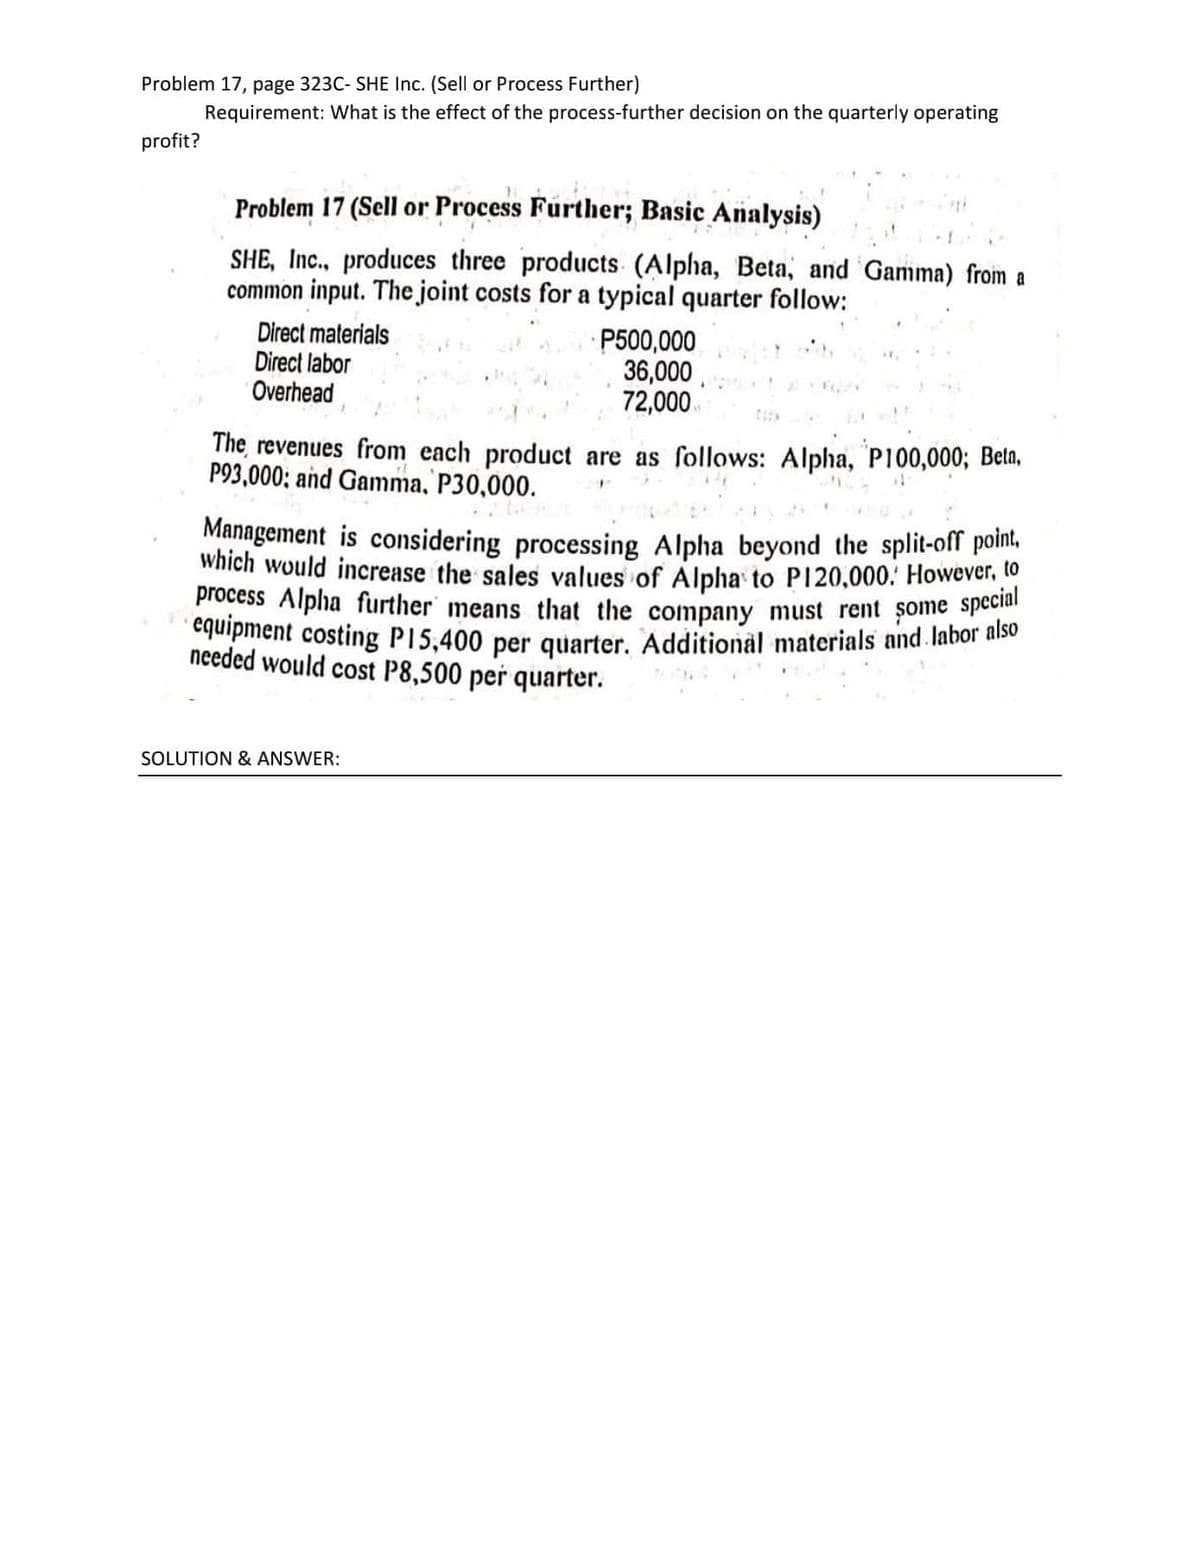 · equipment costing P15,400 per quarter. Additional materials and. labor also
process Alpha further means that the company must rent some special
Problem 17, page 323C- SHE Inc. (Sell or Process Further)
Requirement: What is the effect of the process-further decision on the quarterly operating
profit?
Problem 17 (Sell or Process Further; Basic Analysis)
SHE, Inc., produces three products (Alpha, Beta, and Gamma) from a
common input. The joint costs for a typical quarter follow:
Direct materials
Direct labor
Overhead
P500,000
36,000
72,000
The revenues from each product are as follows: Alpha, P100,000; Betn,
P93,000; and Gamma, P30,000.
Management is considering processing Alpha beyond the split-off point,
Which would increase the sales values of Alpha to P120,000: However, to
needed would cost P8,500 per quarter.
SOLUTION & ANSWER:
